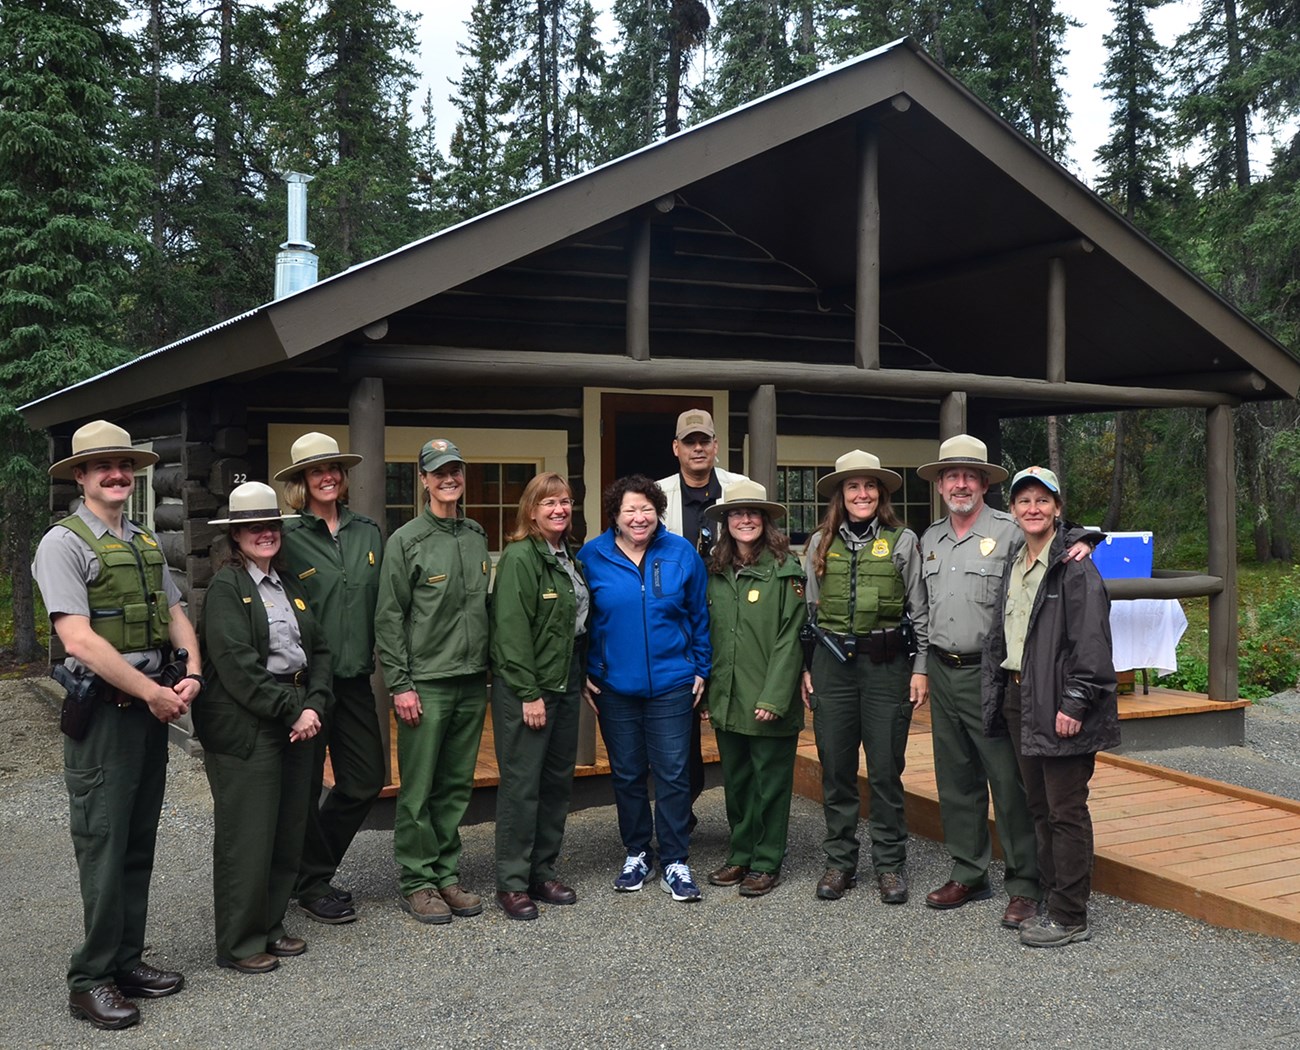 uniformed park rangers posing for a group photo with a supreme court justice